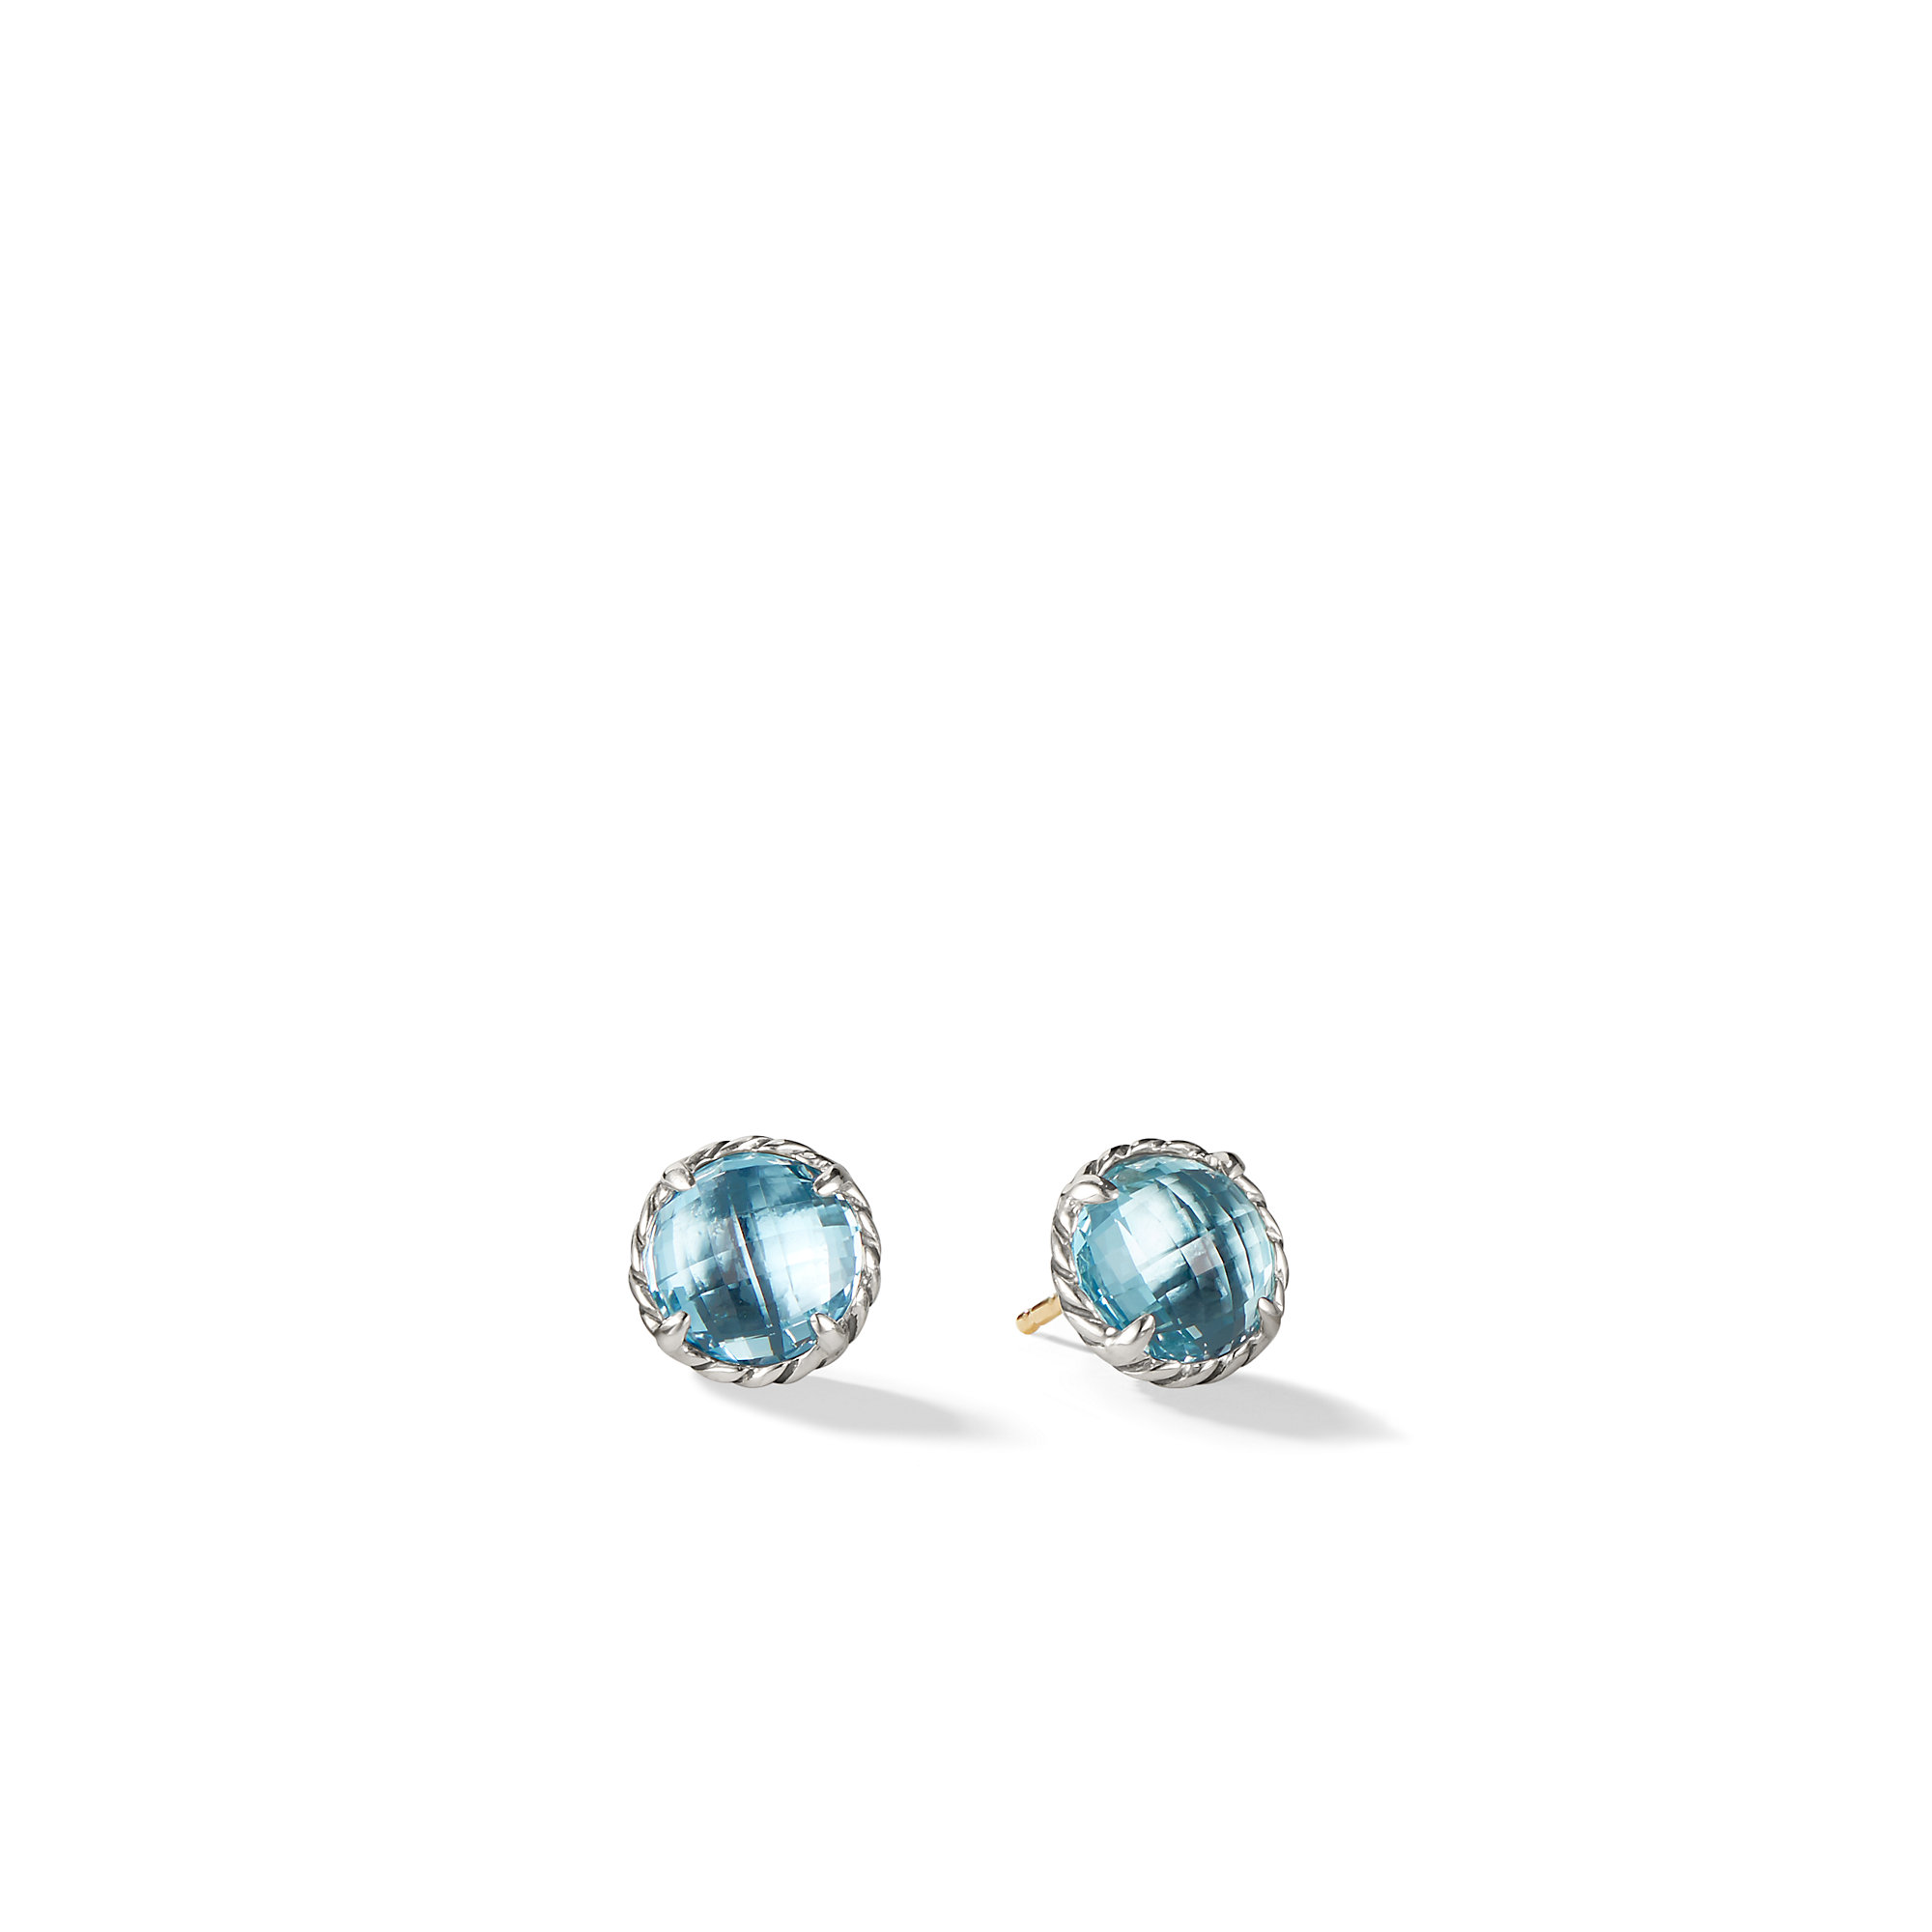 Petite Chatelaine® Stud Earrings in Sterling Silver with Blue Topaz